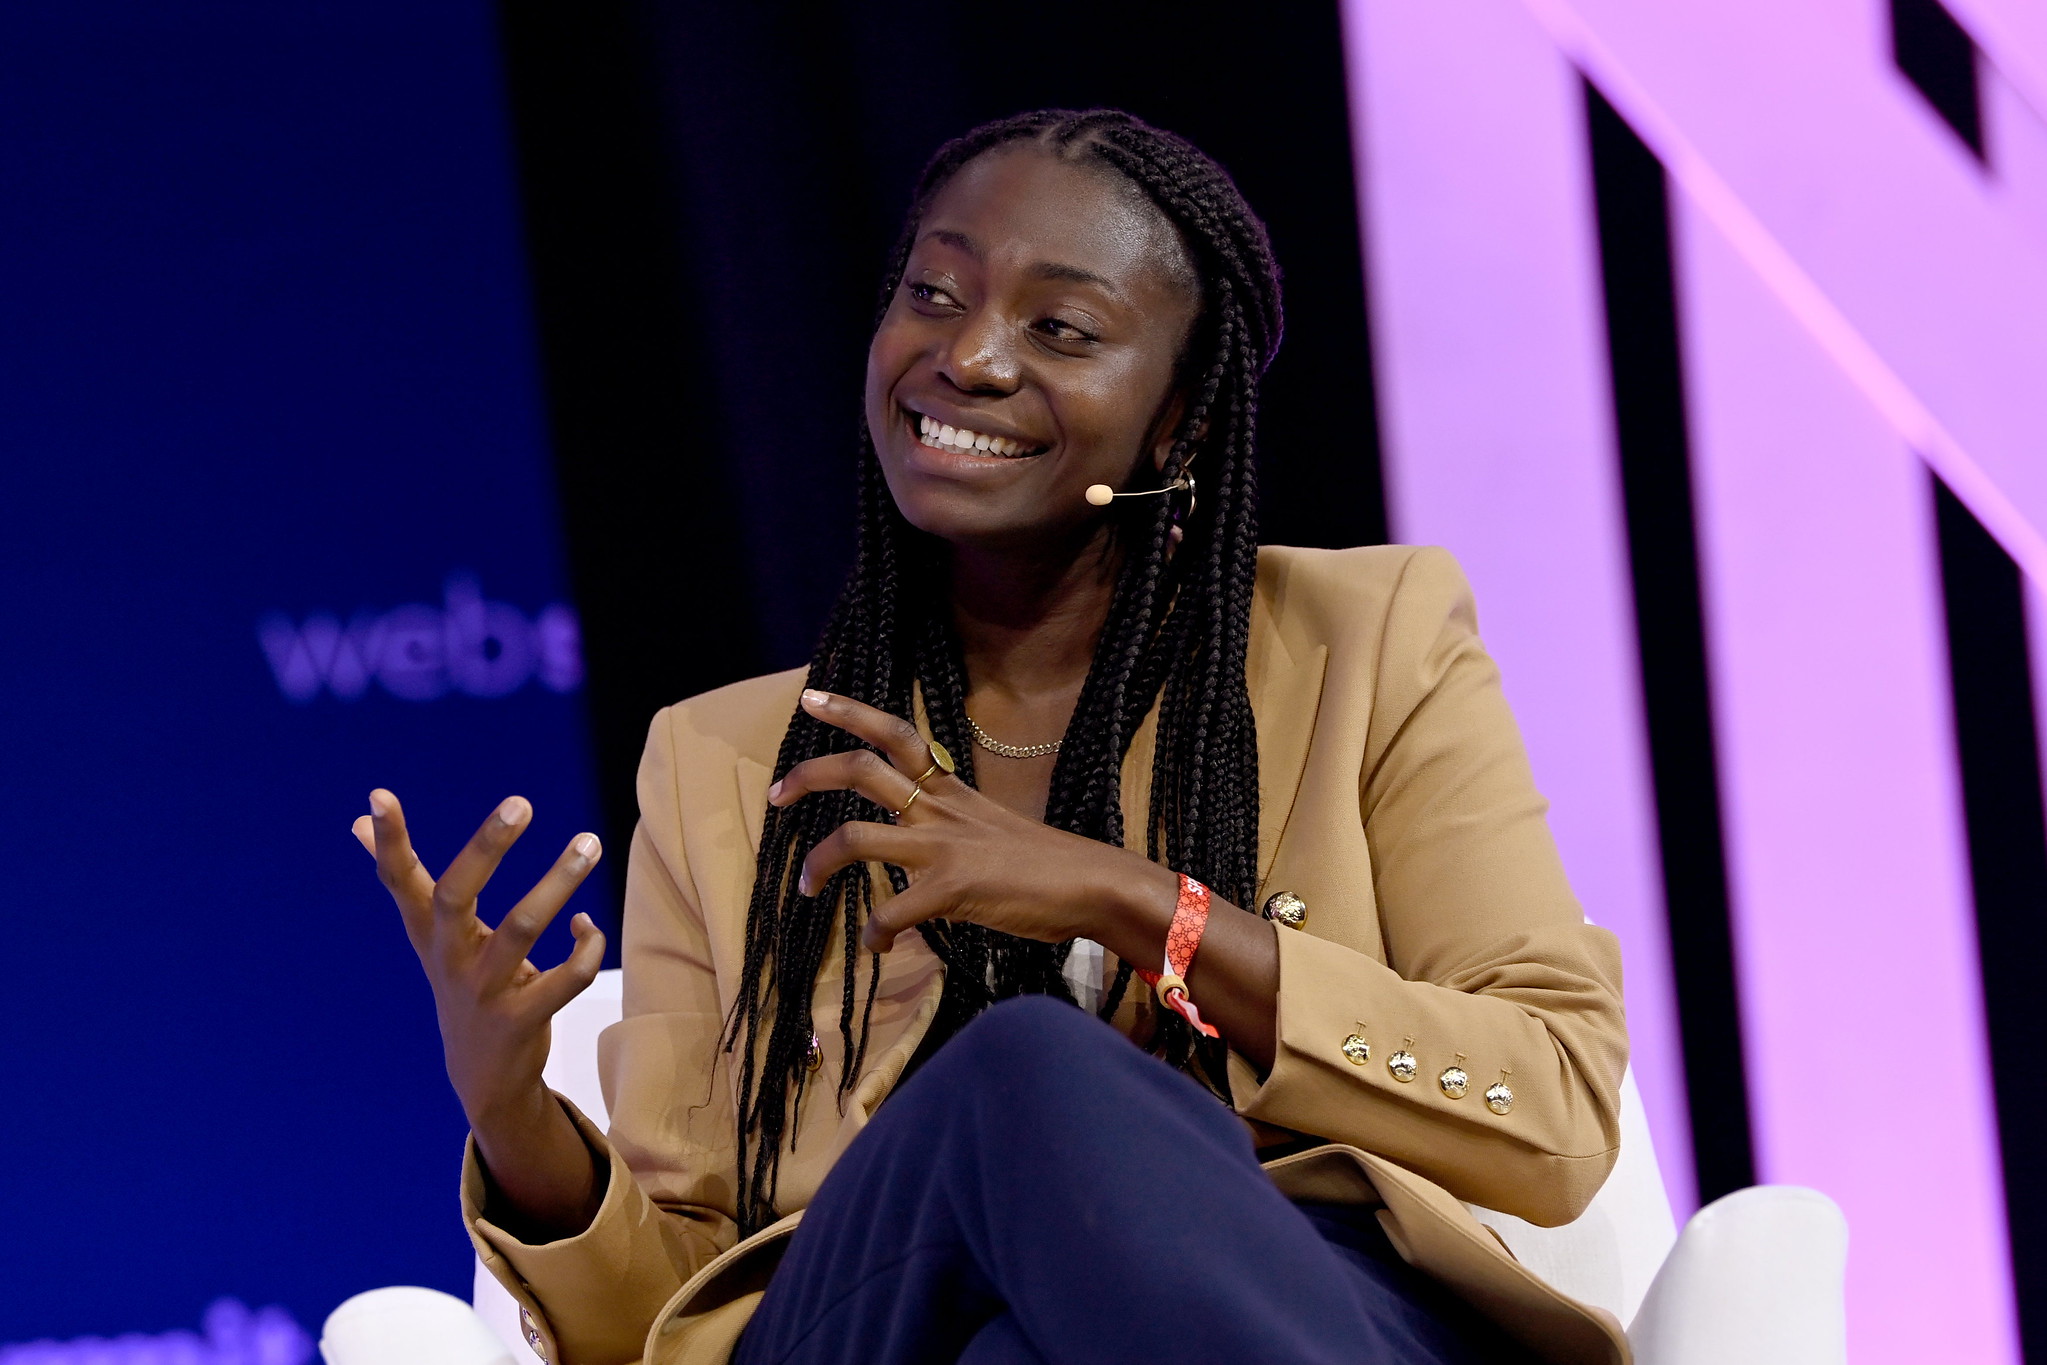 Speaker Christiana Bukalo, Co-founder, Statefree, on the Future Societies Stage during day two of Web Summit 2022